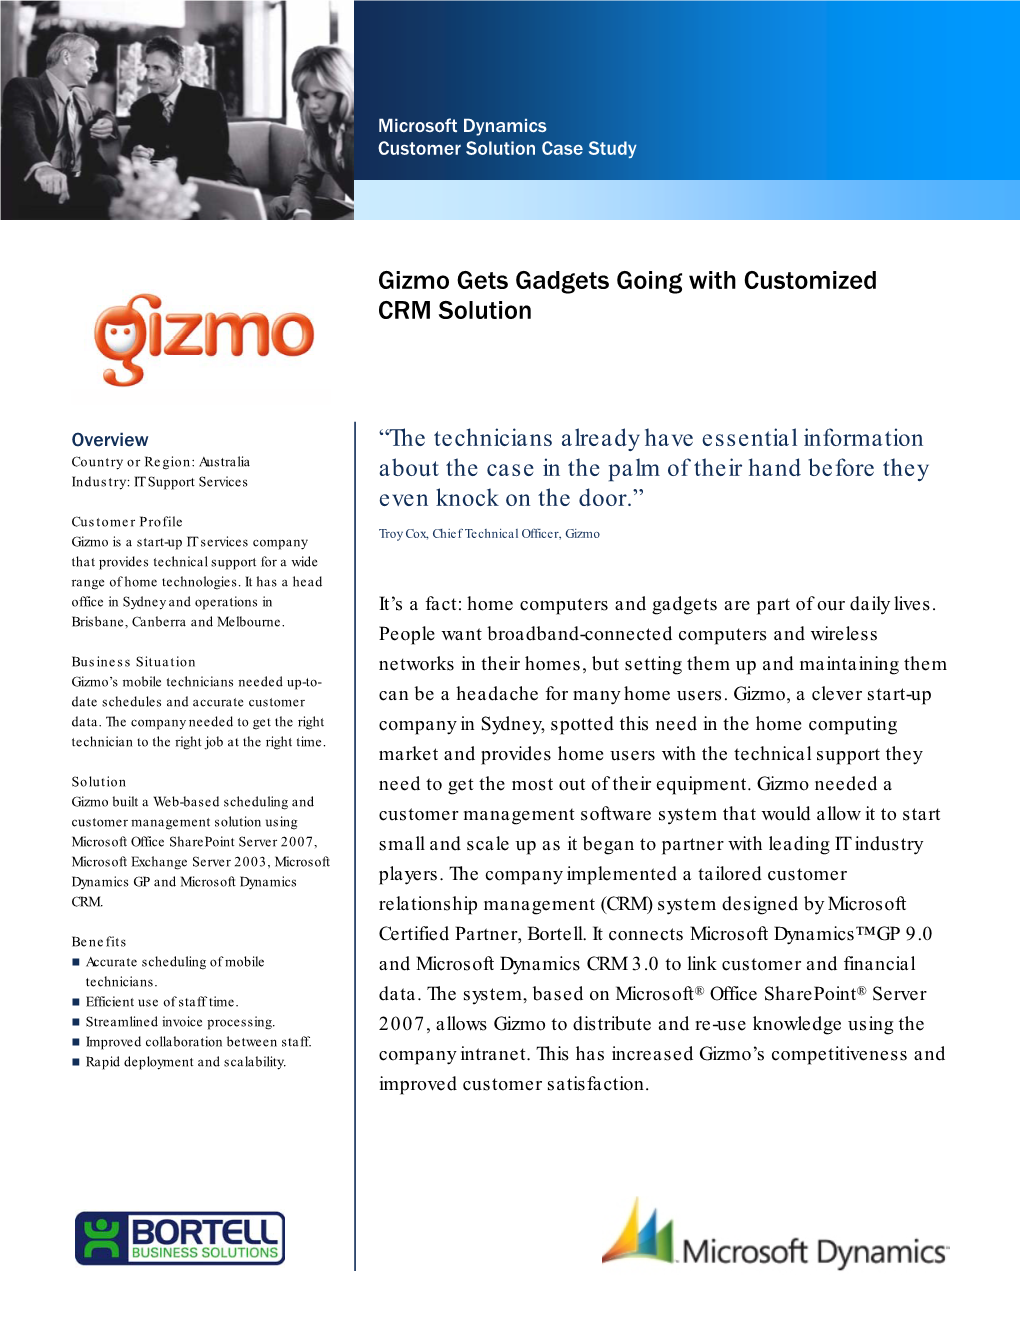 Gizmo Gets Gadgets Going with Customized CRM Solution